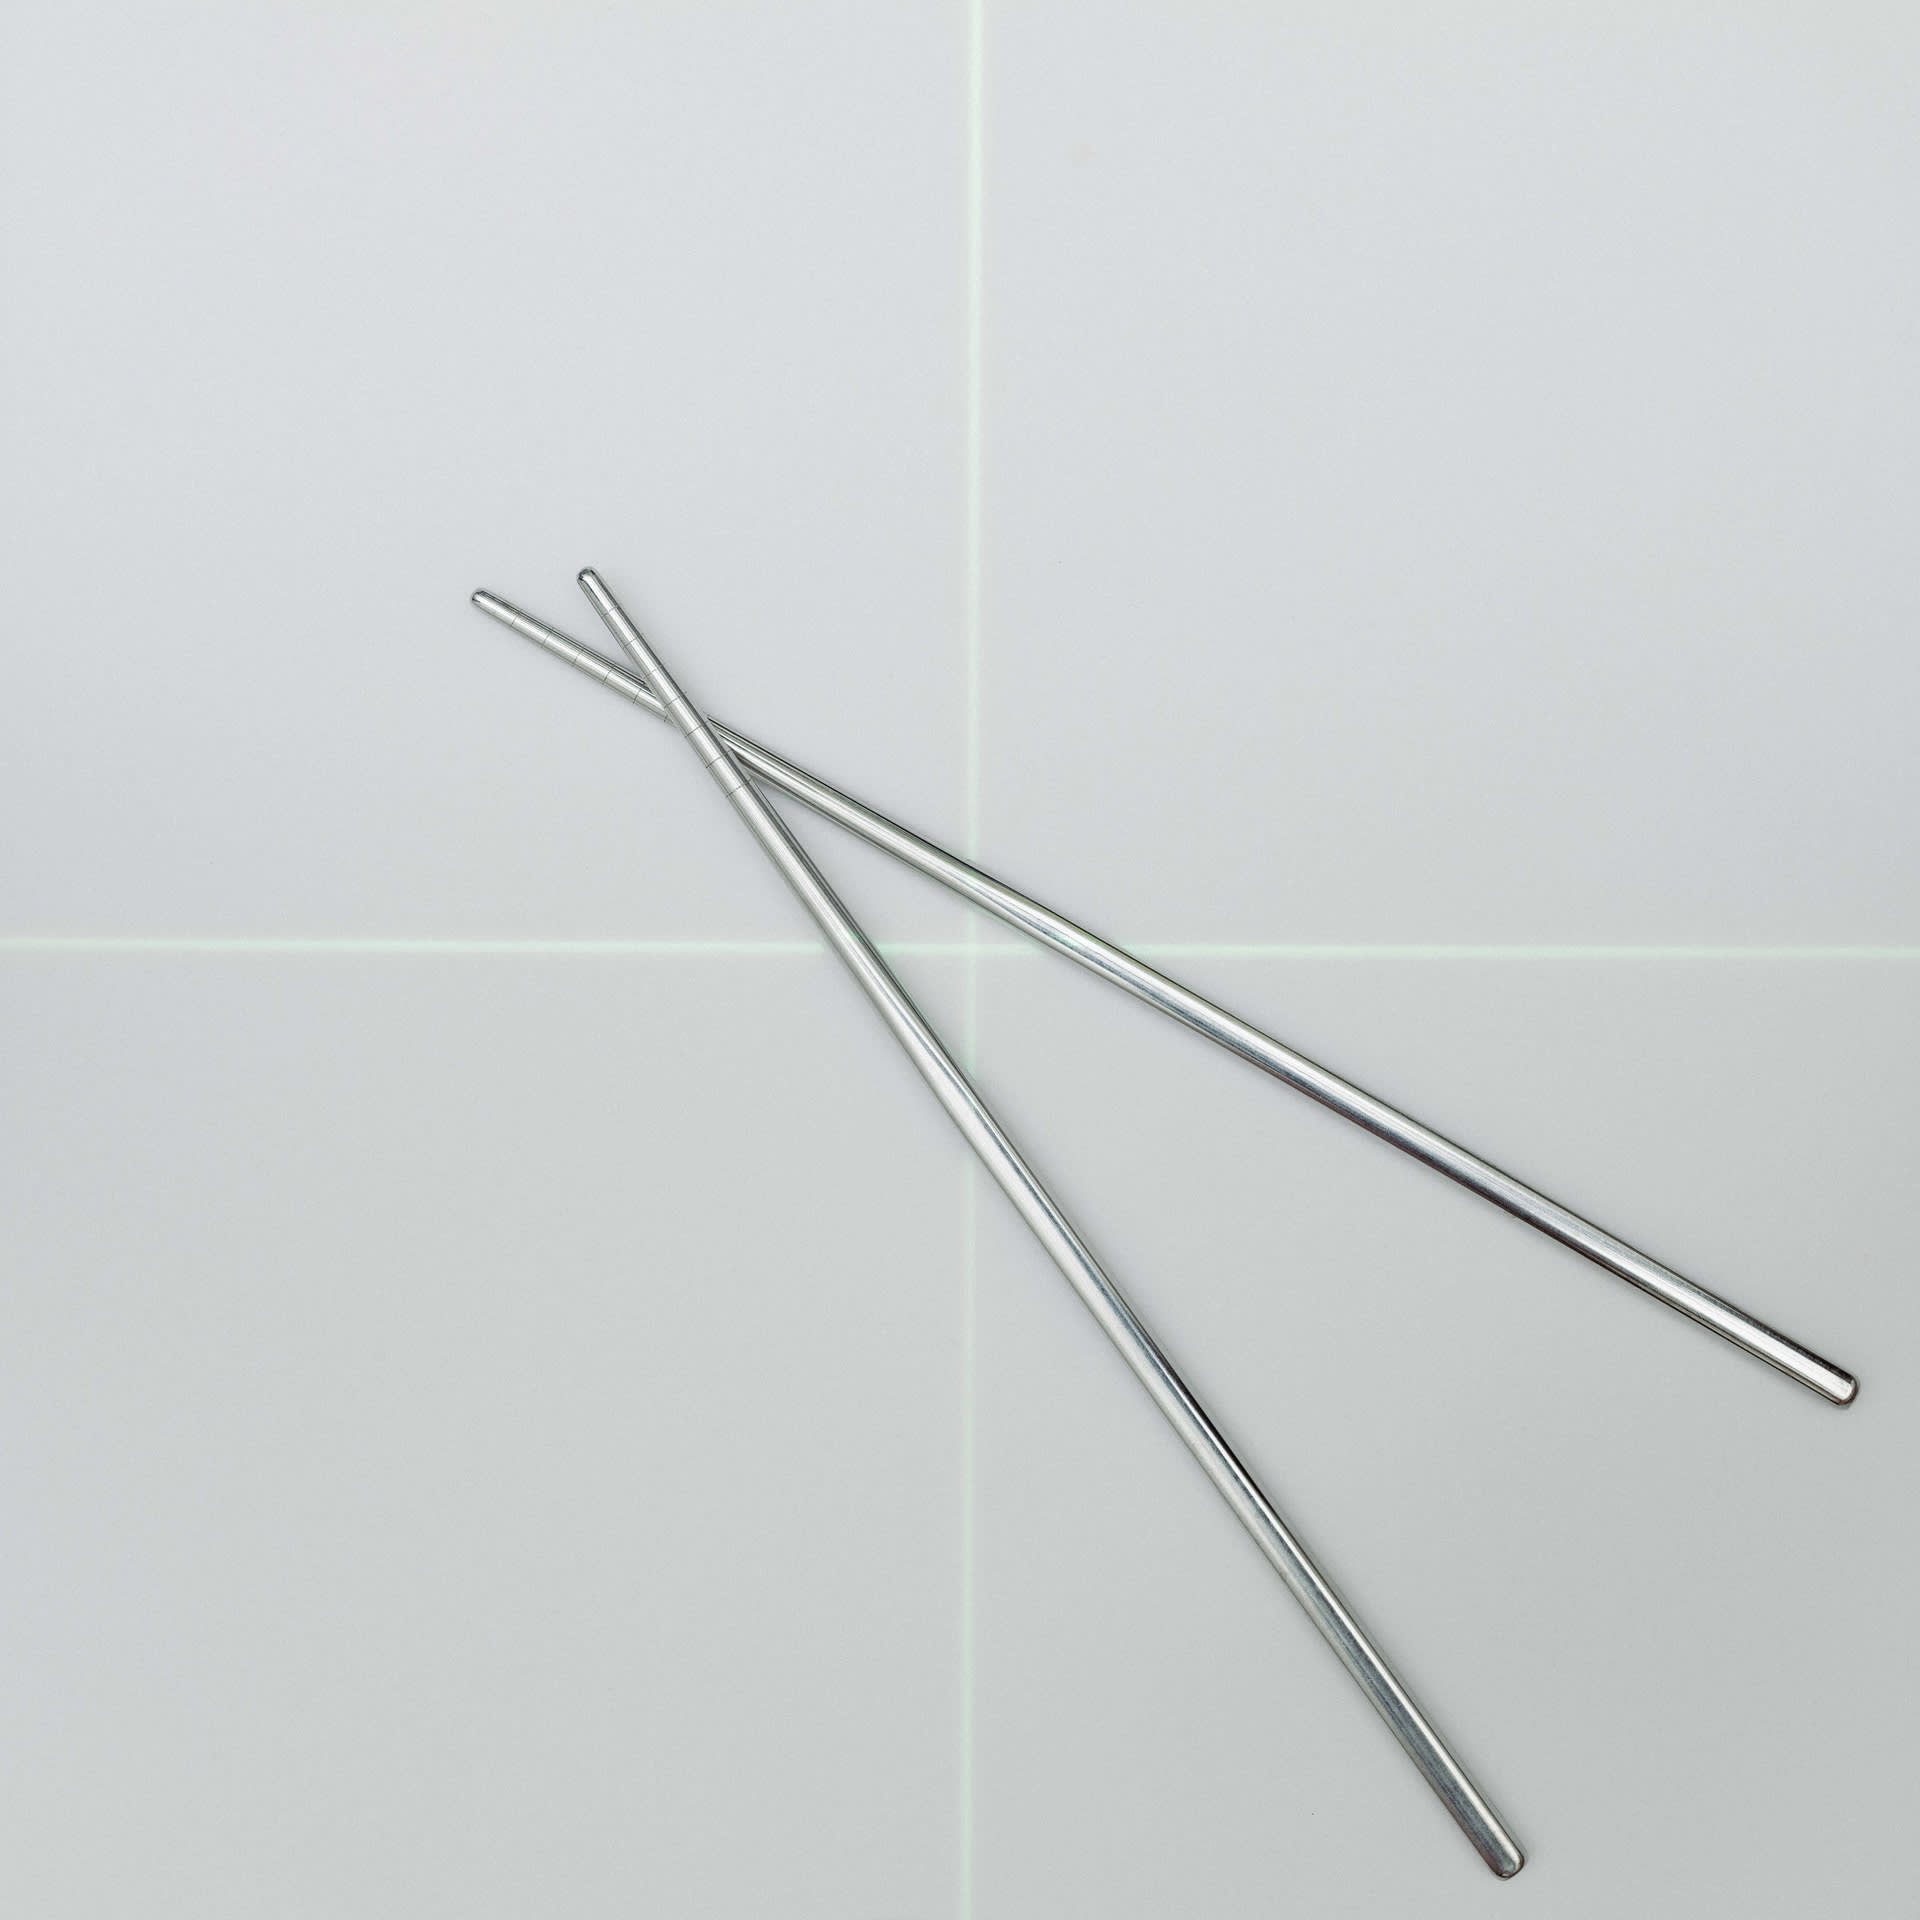 A green cross-shaped laser is projected onto a metal chopstick against a pure white background.